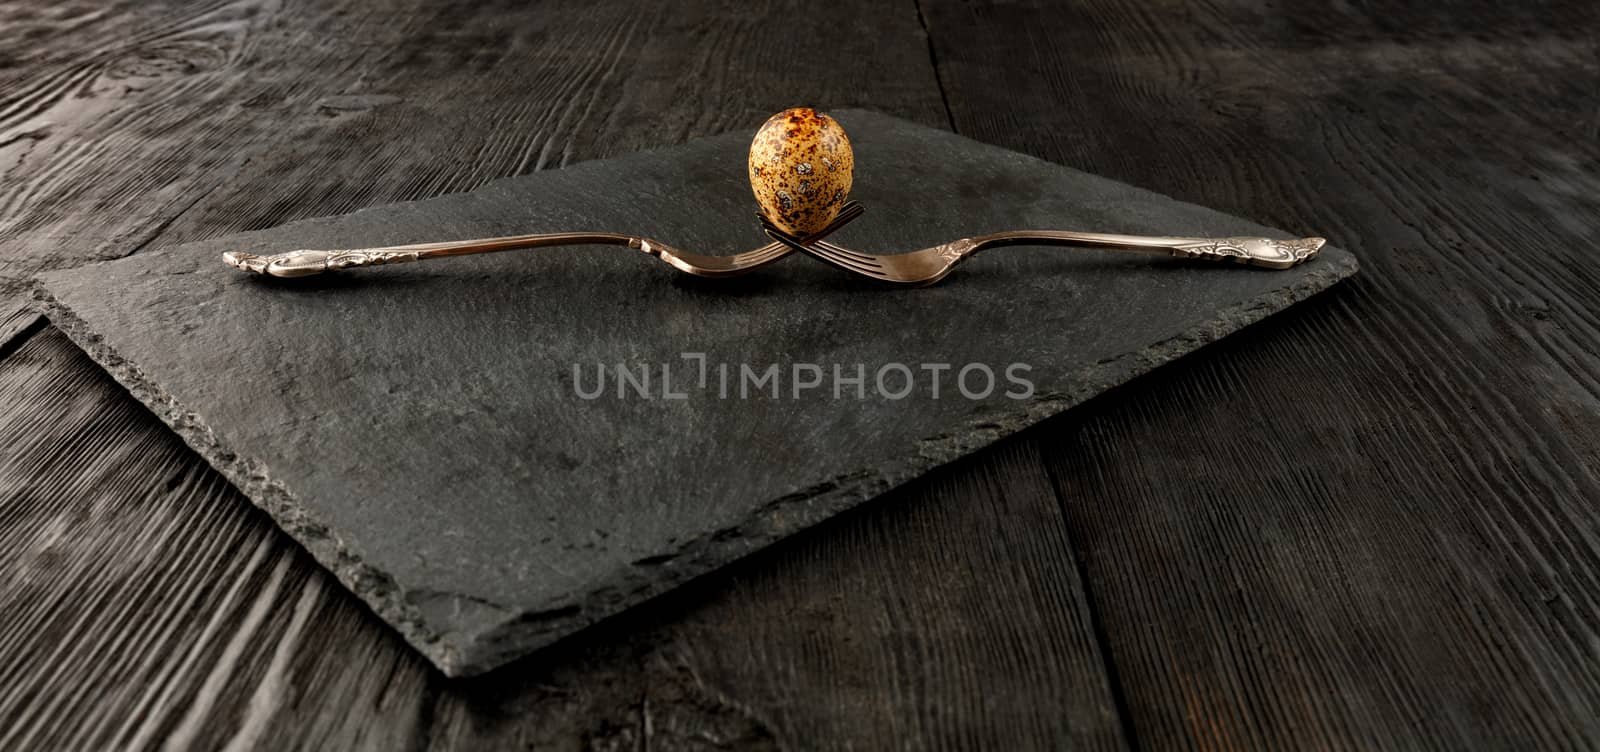 Quail egg on two old crossed forks on a kitchen cutting board. by Sergii